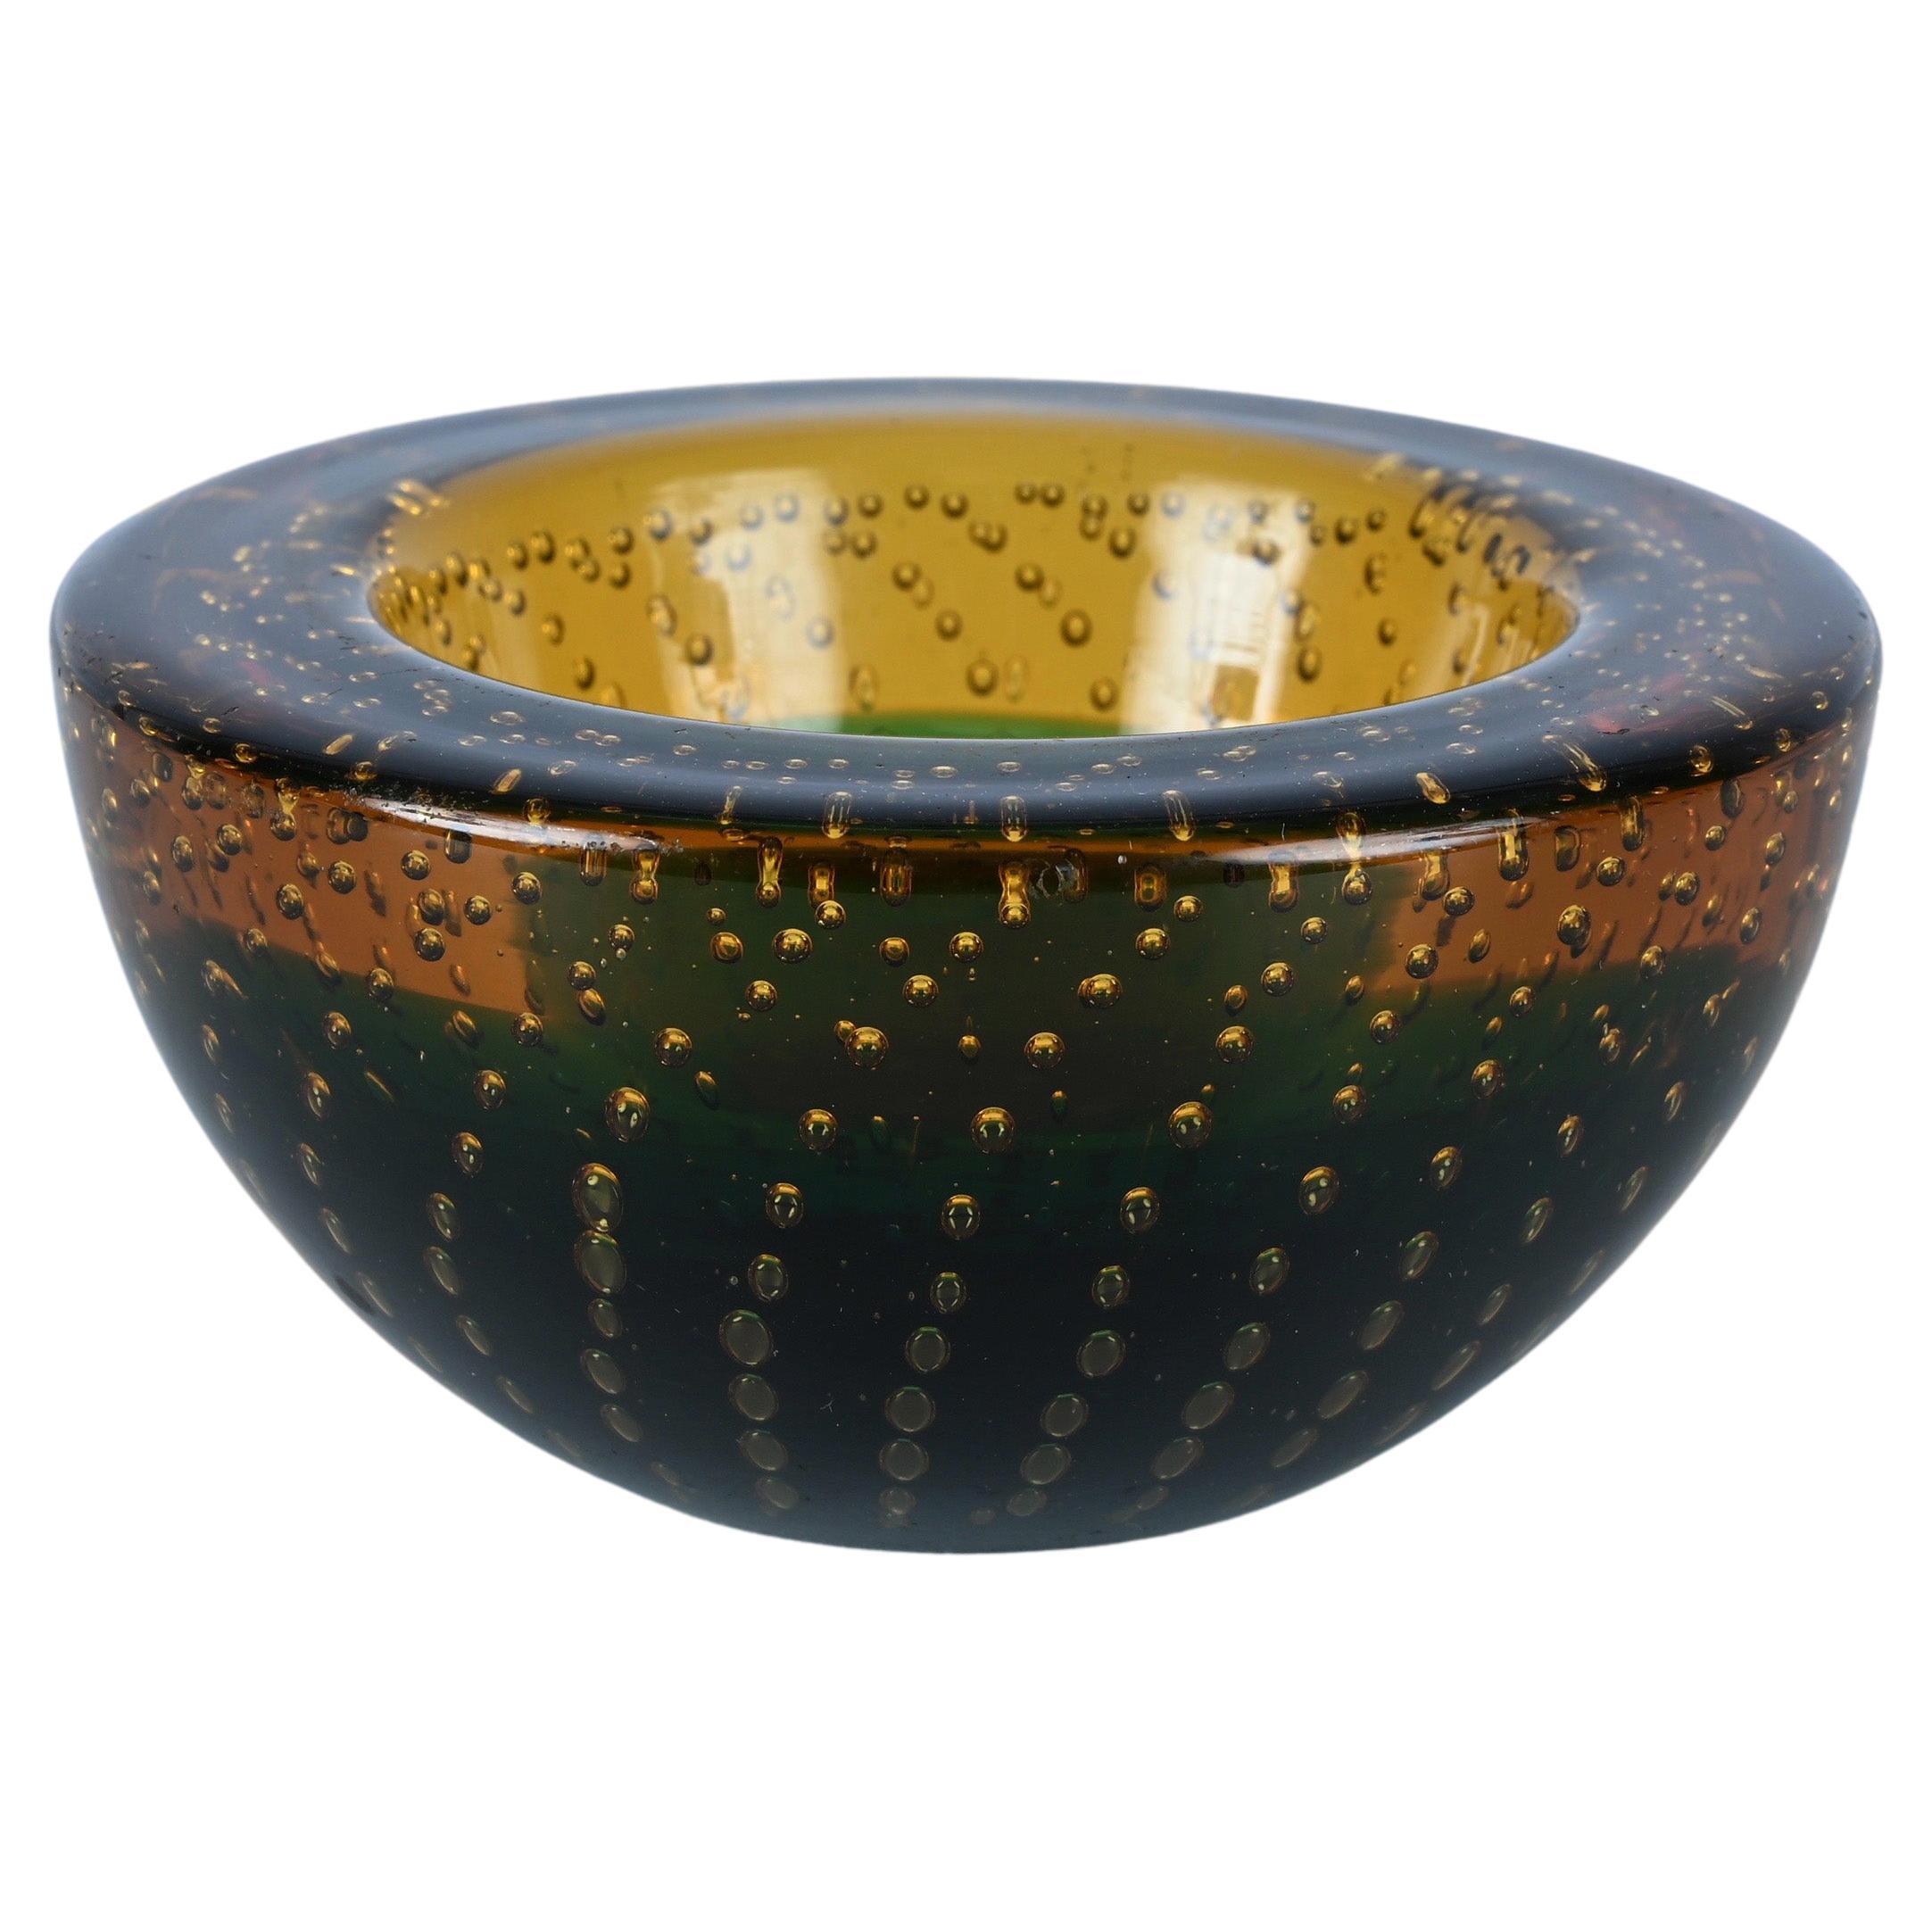 Spectacular mid-century decorative Murano Art glass bowl in dark amber, yellow, green and blue Murano glass with air bubbles (bullicante). This incredible piece was produced in Italy during the 1960s and it is attributed to Galliano Ferro.

This